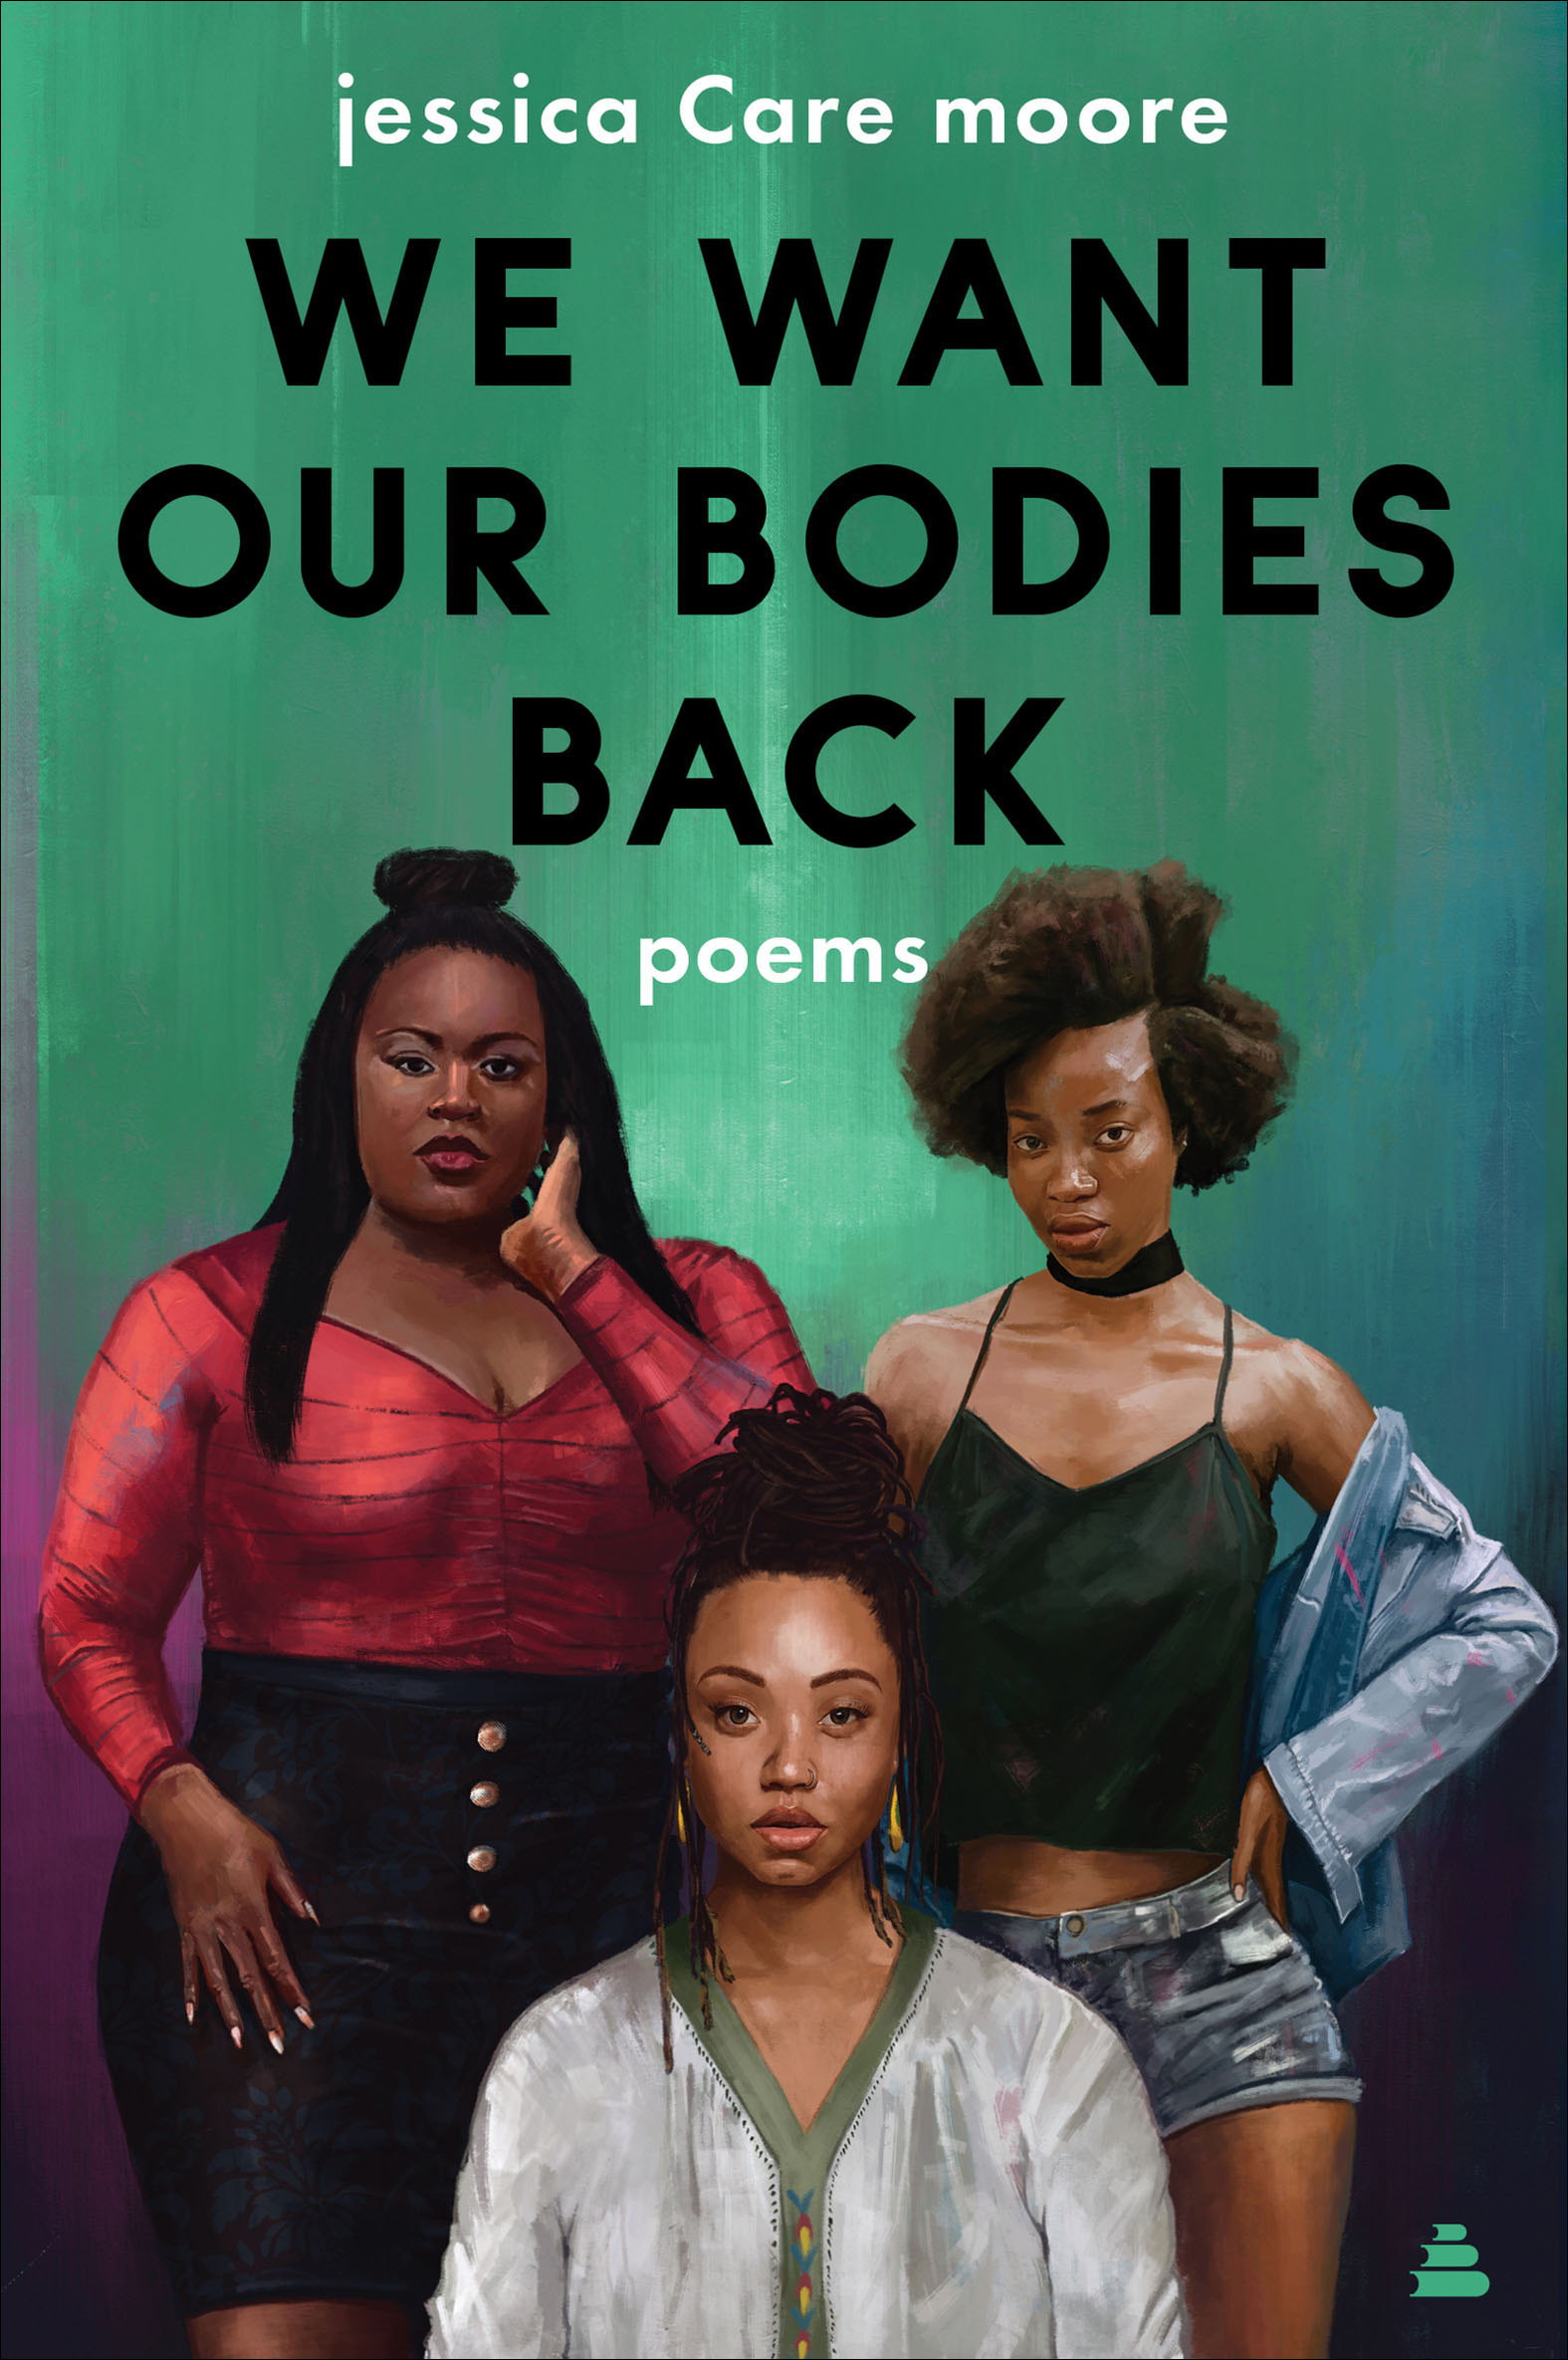 We want our bodies back poems cover image